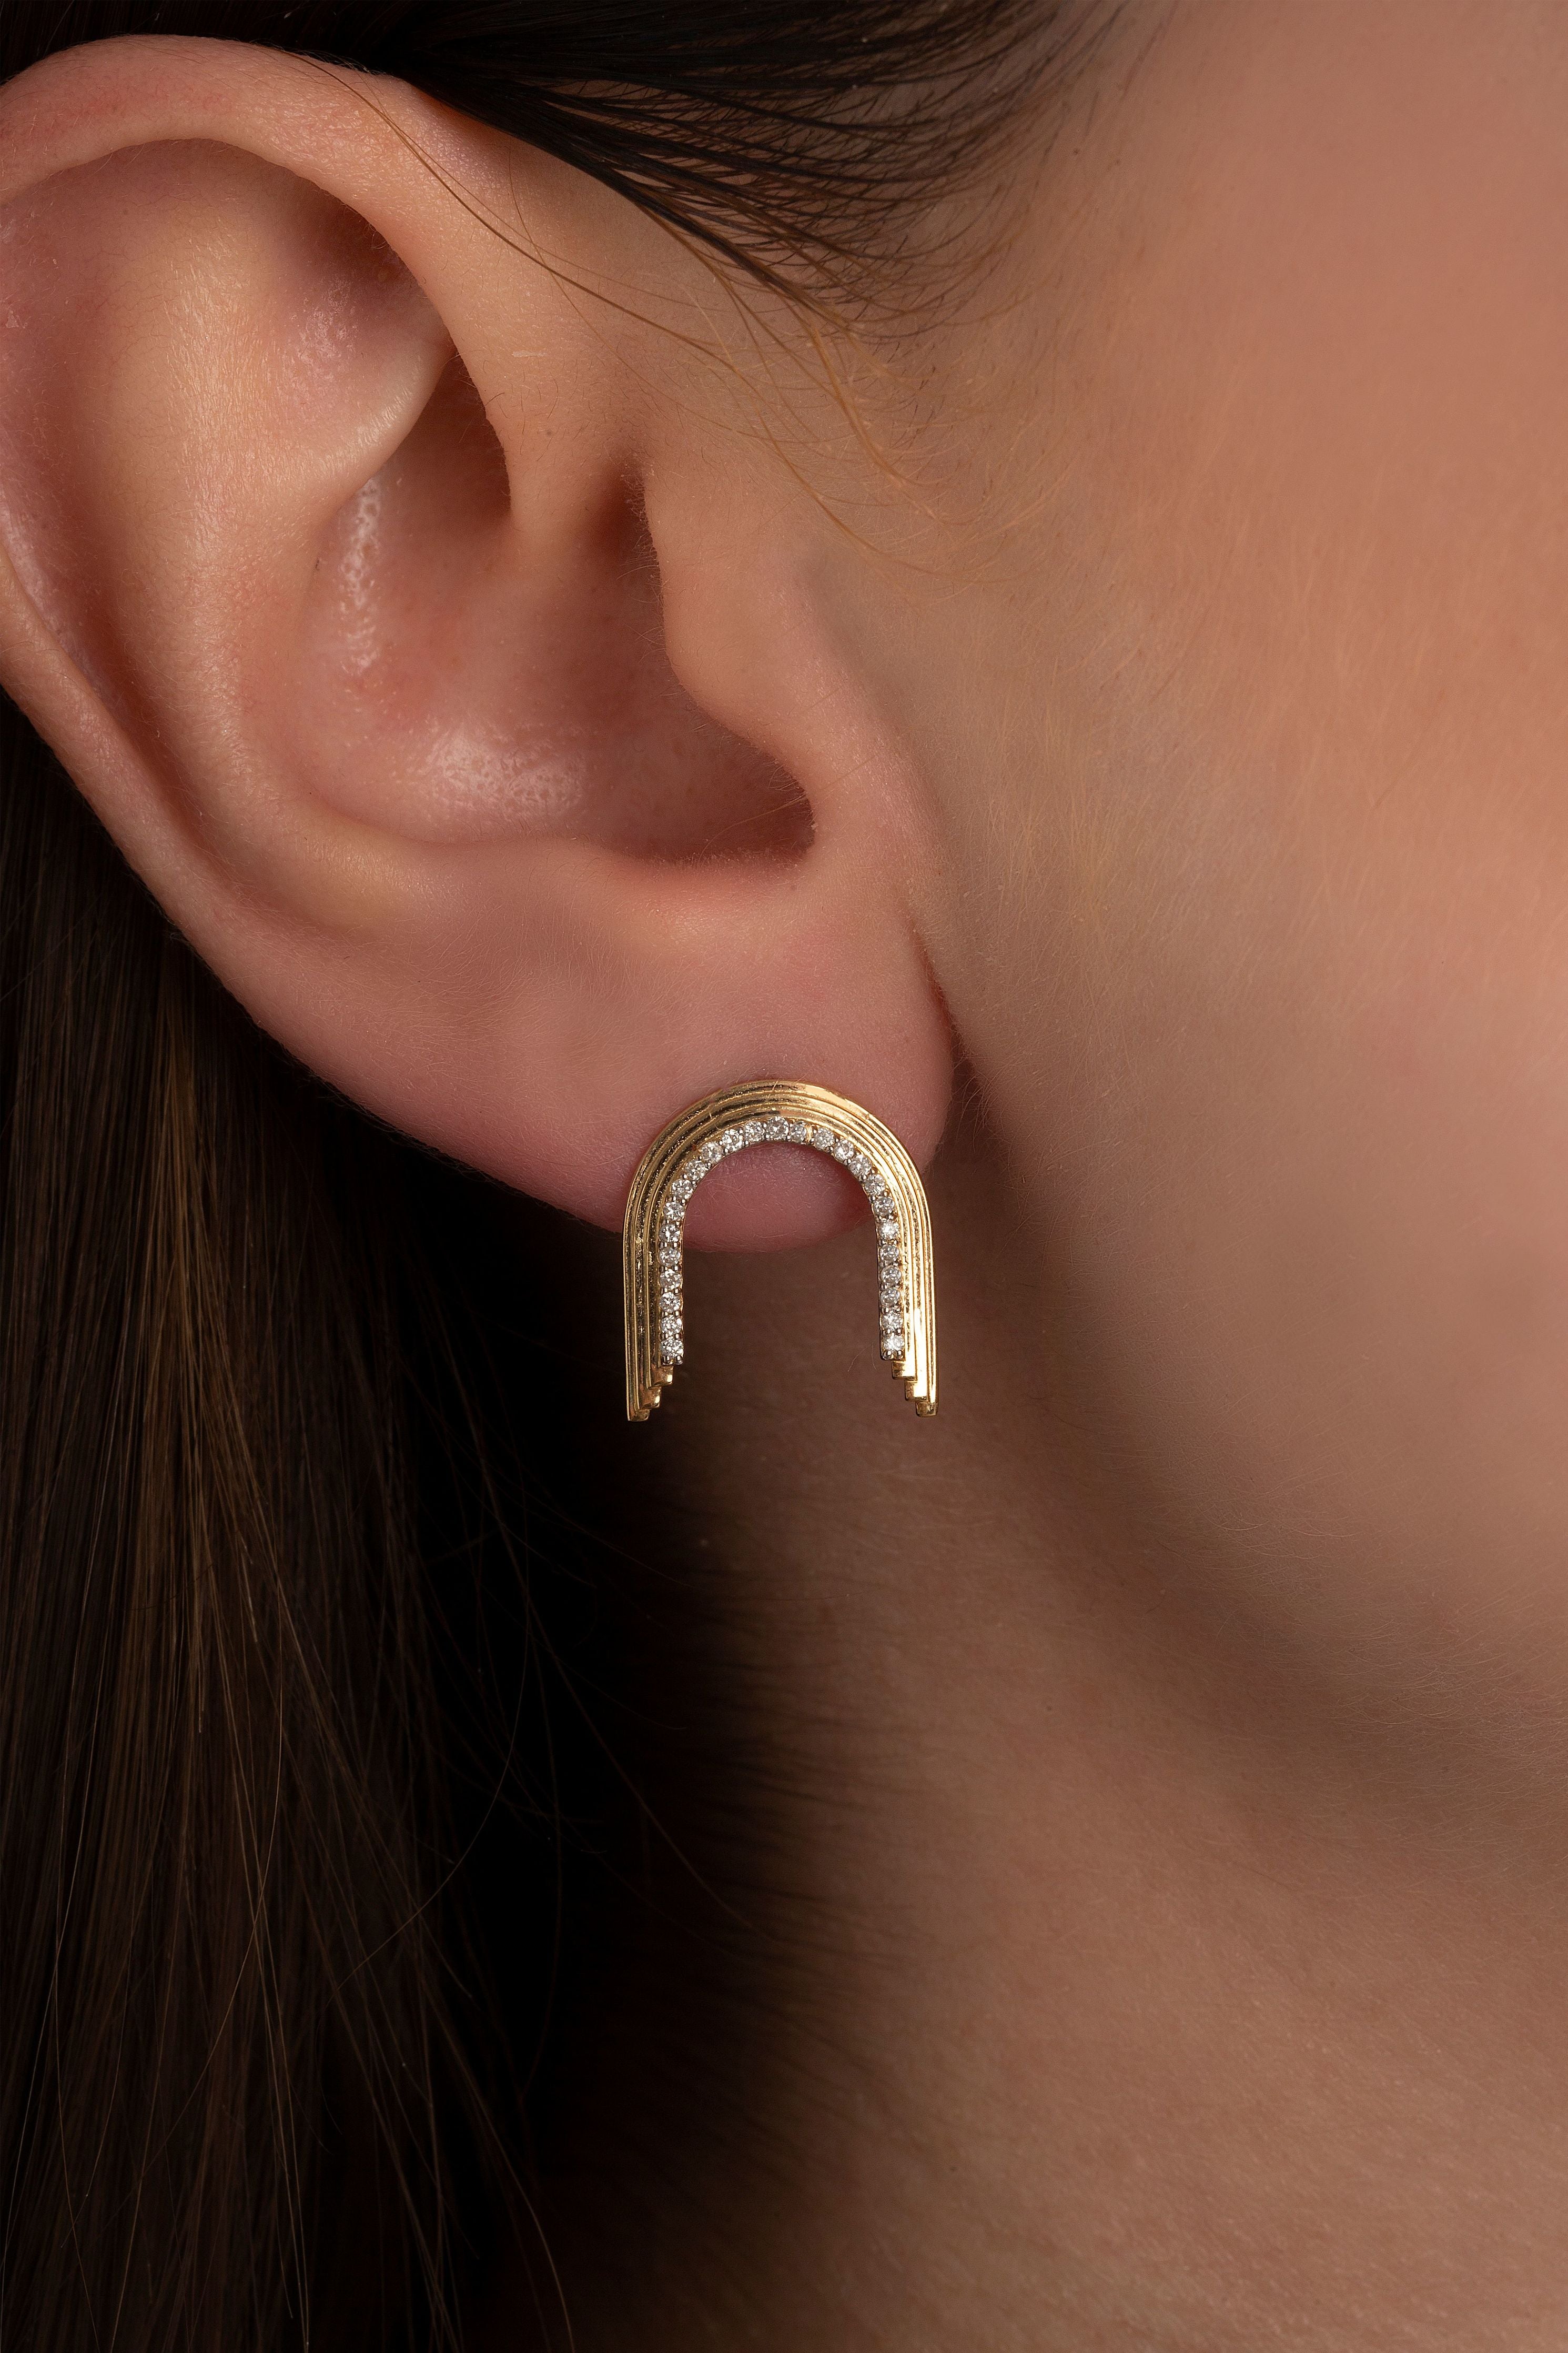 Concave Arch Earring in Yellow Gold - Her Story Shop